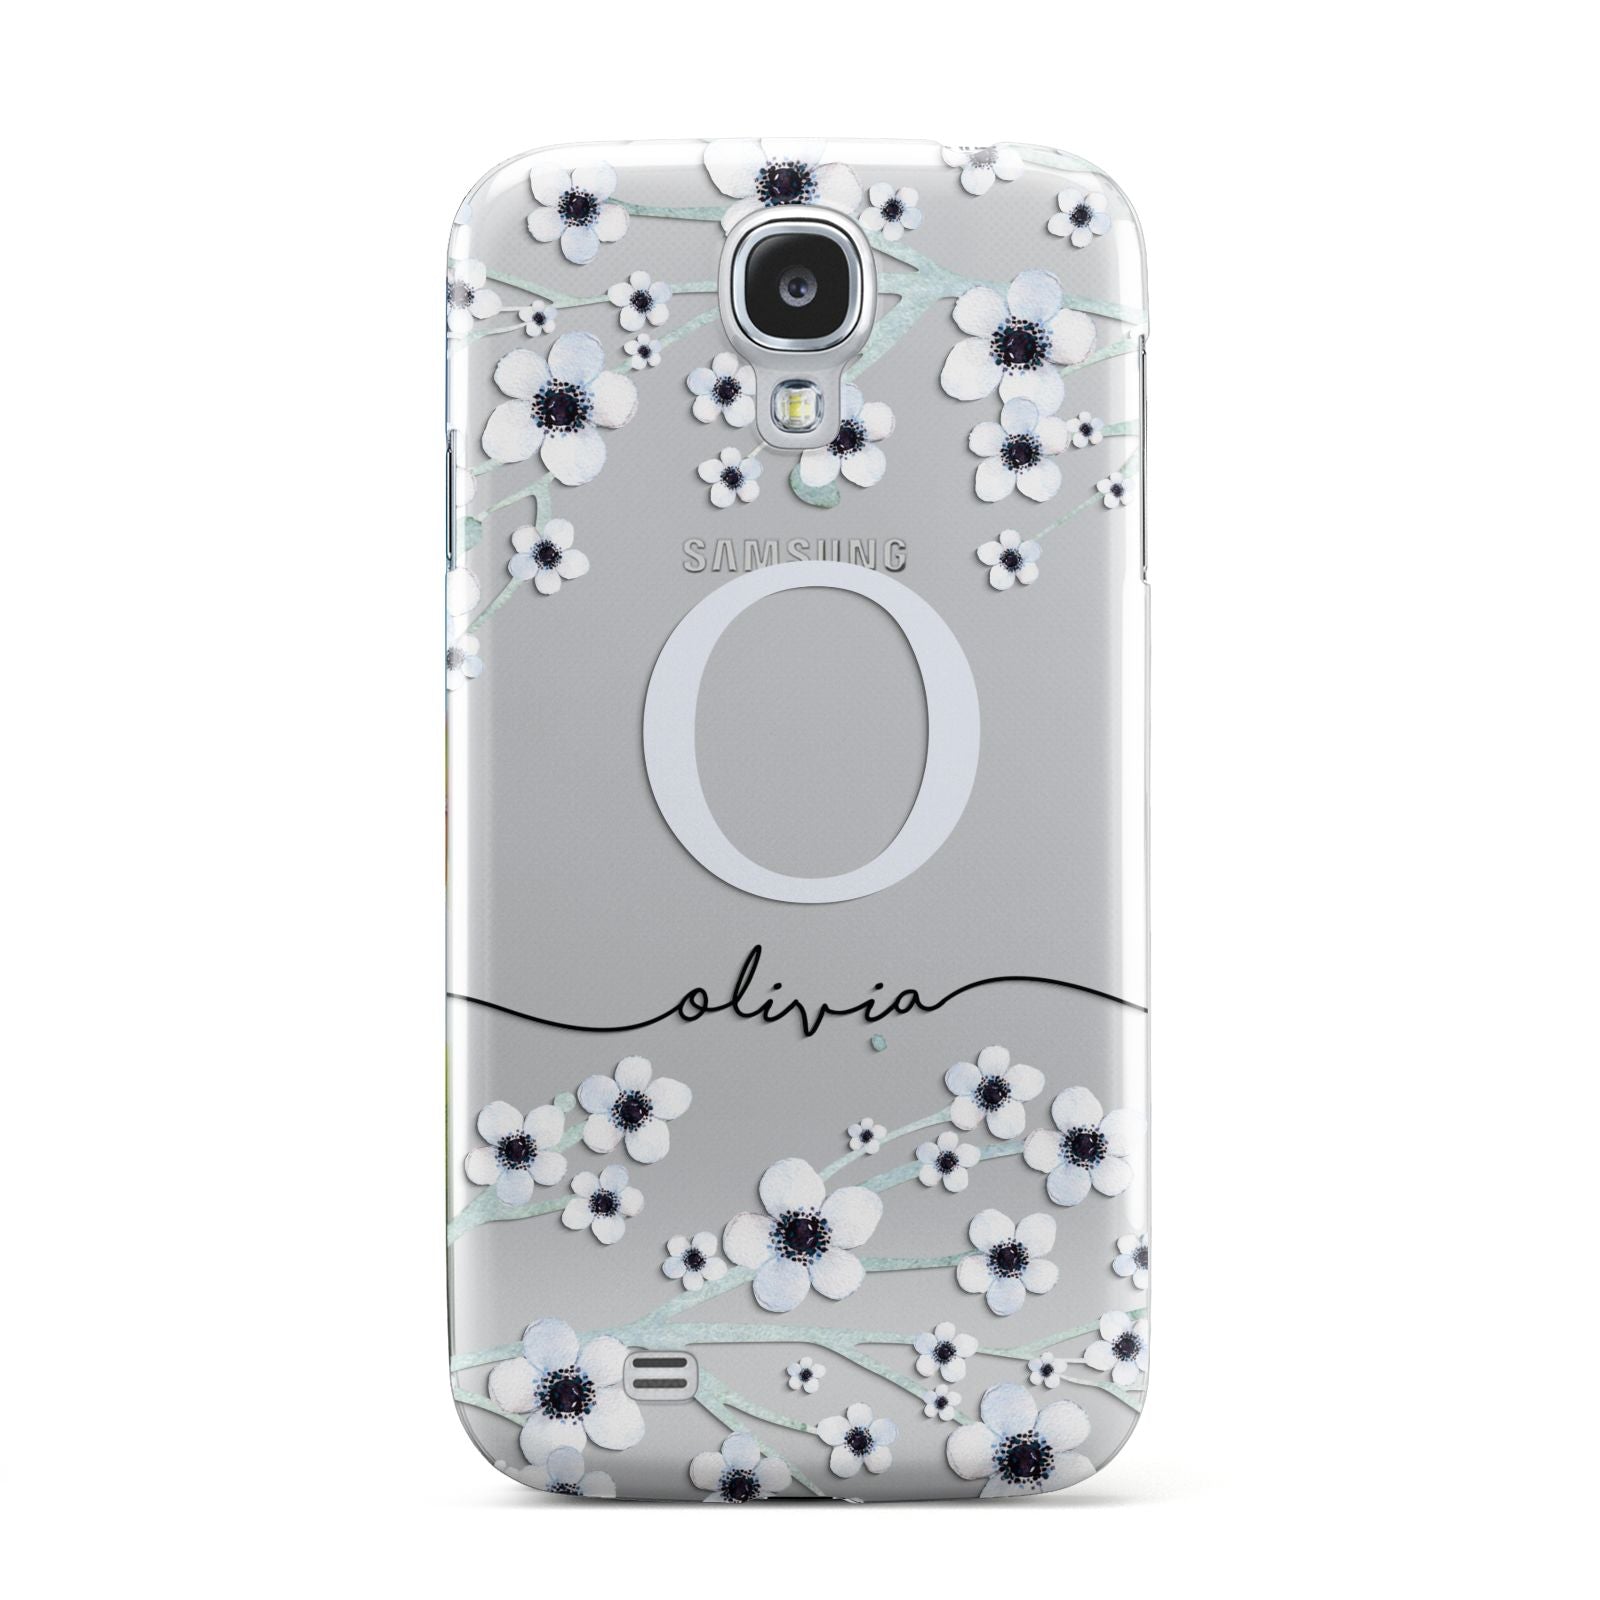 Personalised White Flower Samsung Galaxy S4 Case